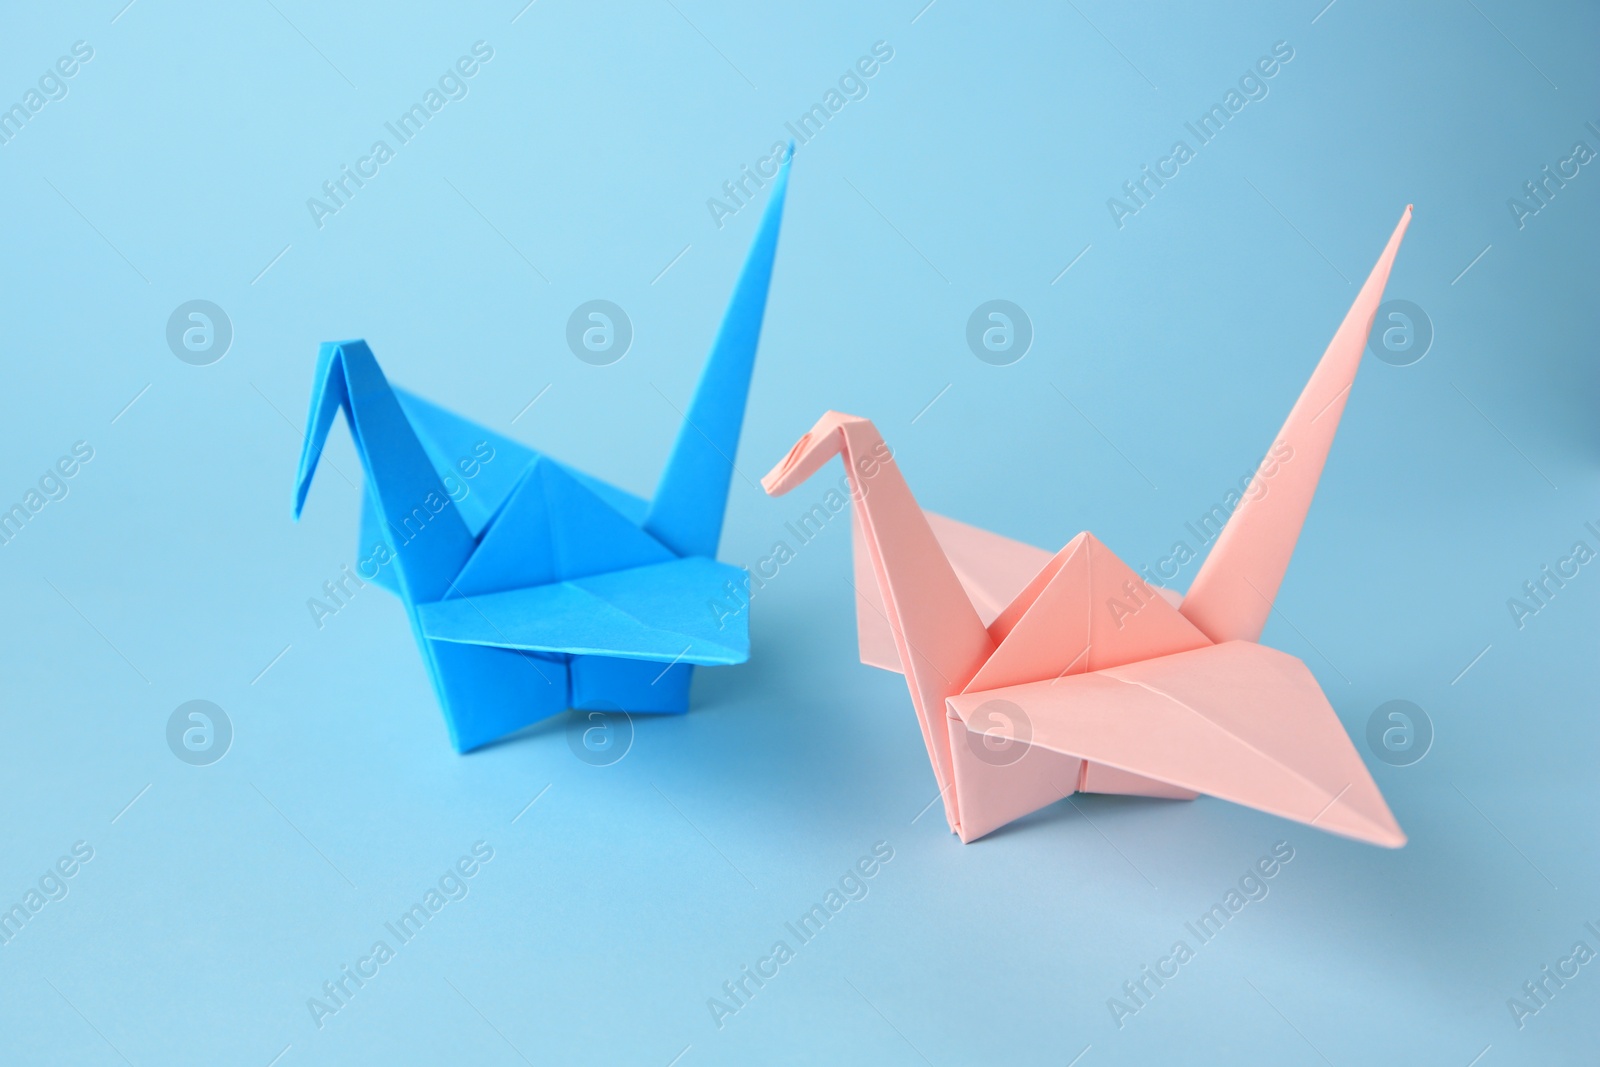 Photo of Origami art. Colorful handmade paper cranes on light blue background